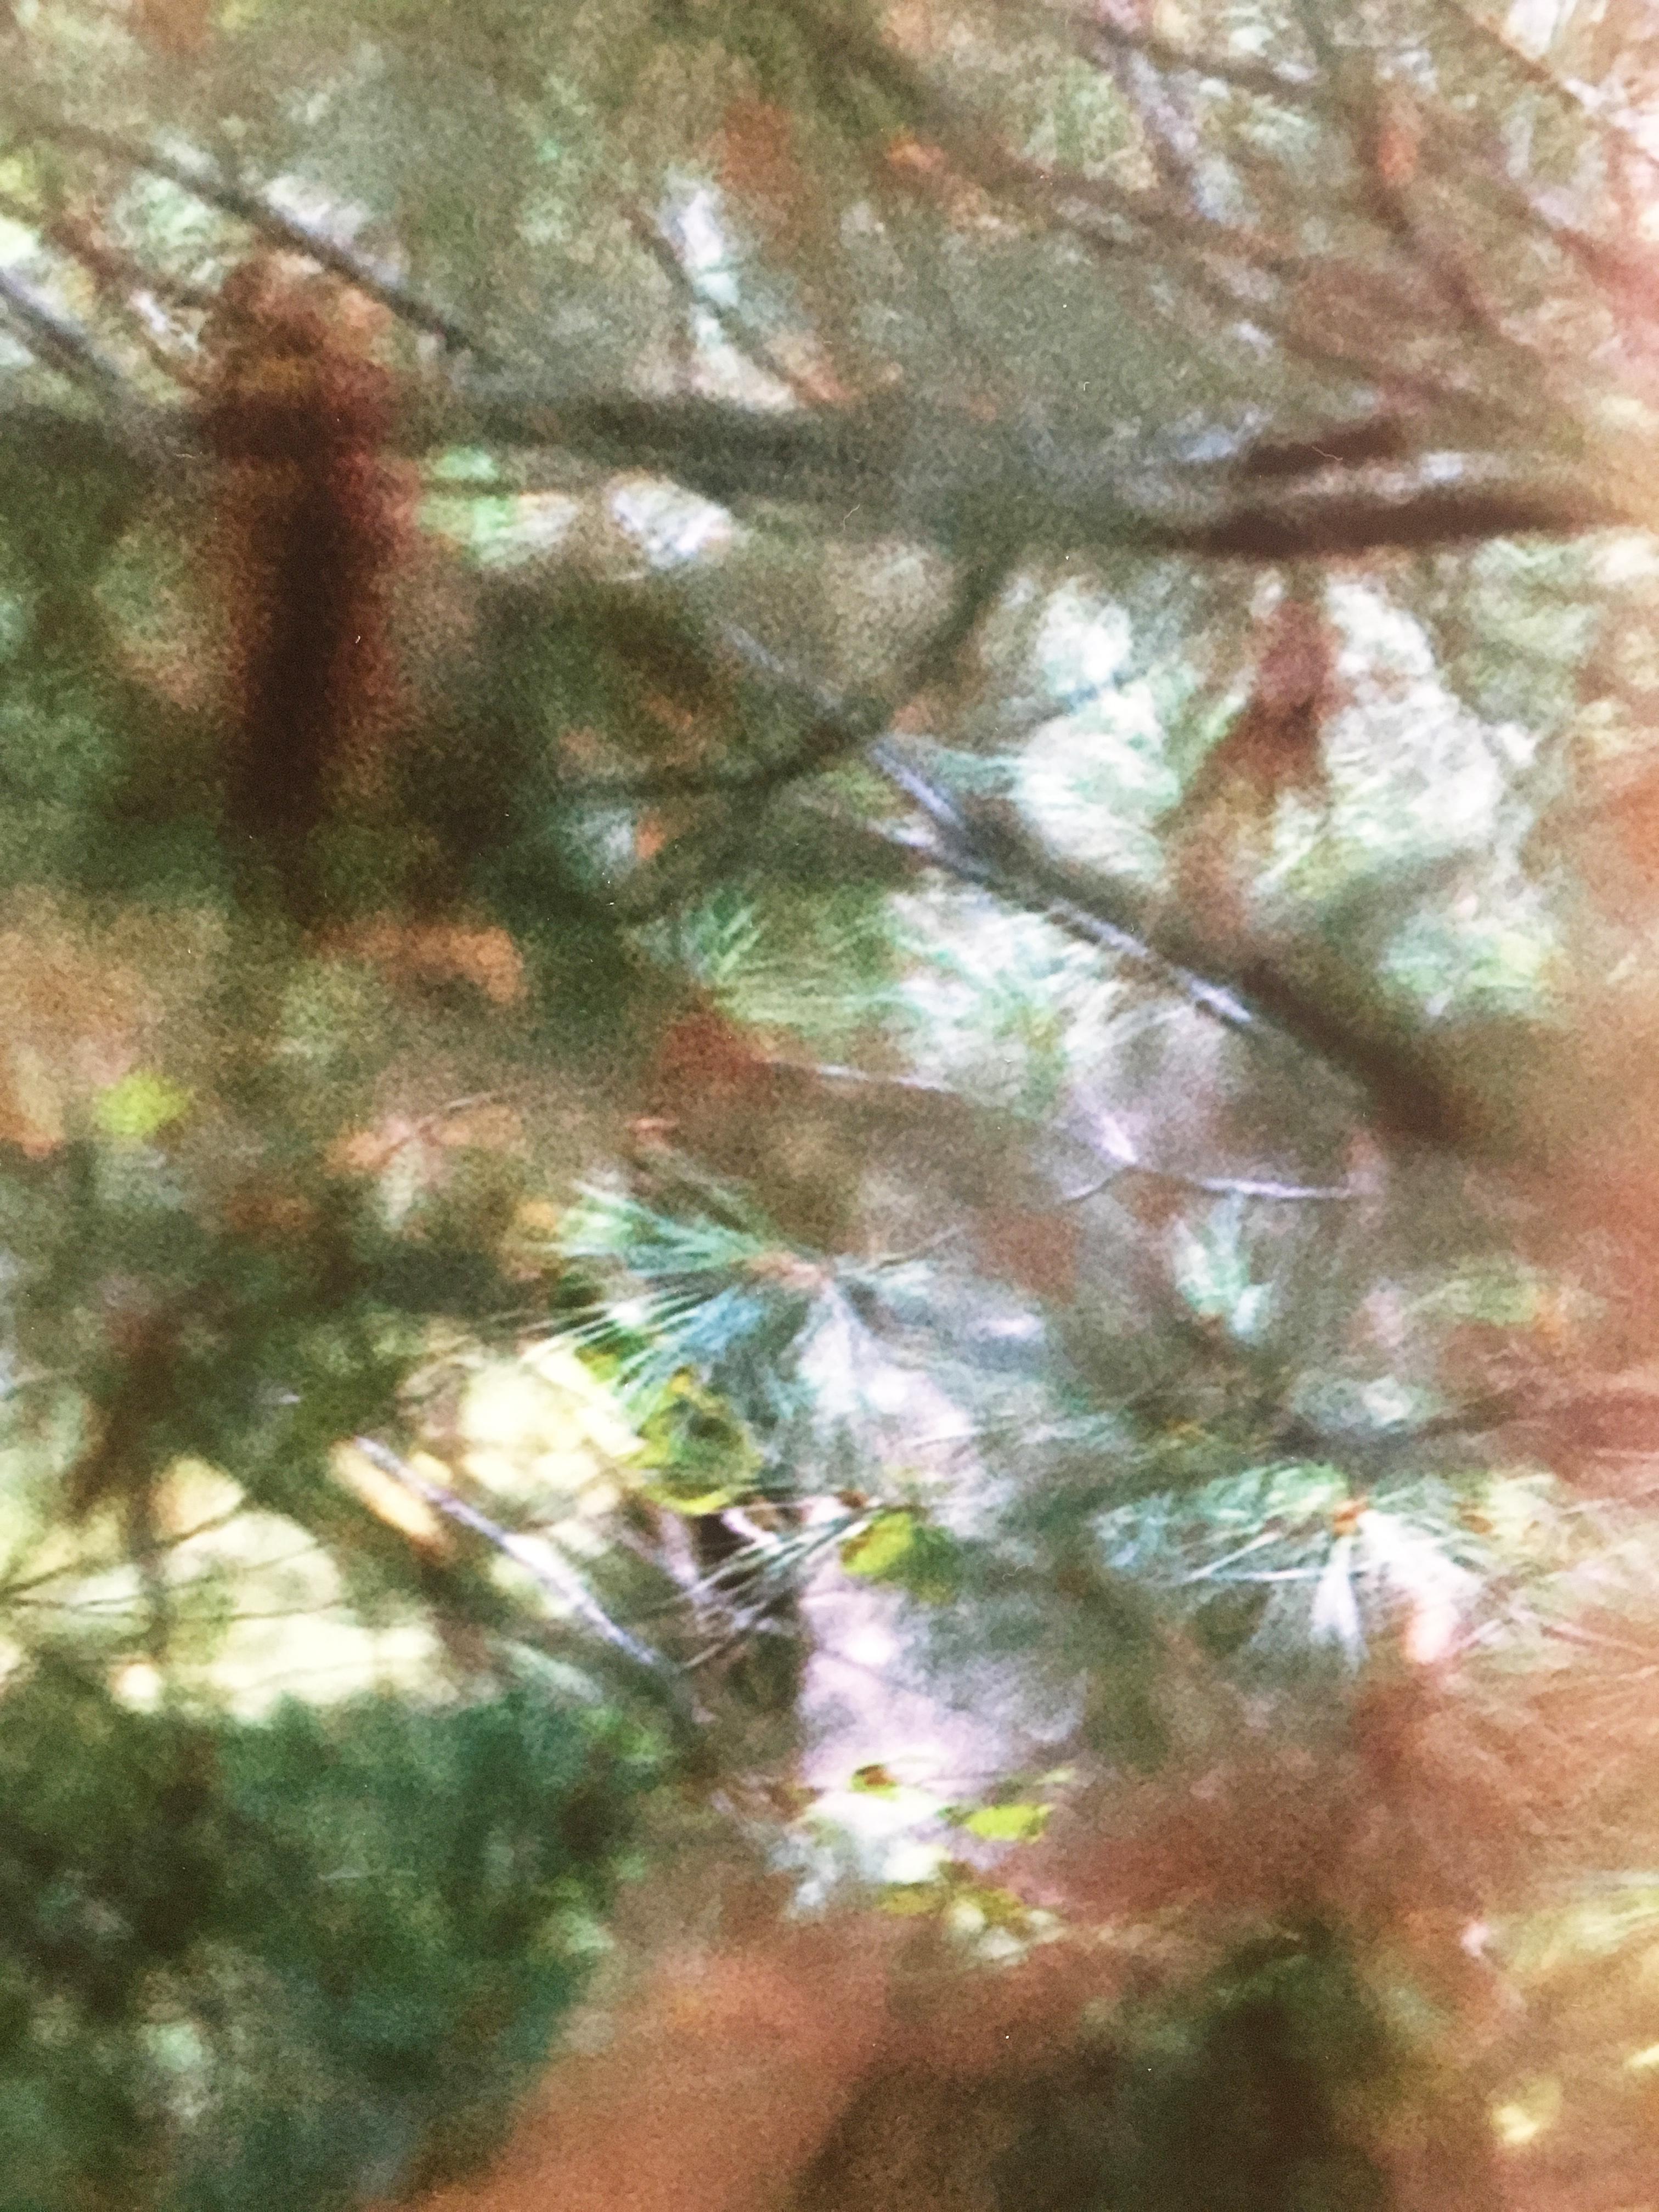 Abstract Nature Photograph by camera artist Susan Wides '8.31.15_4:45:54' For Sale 3